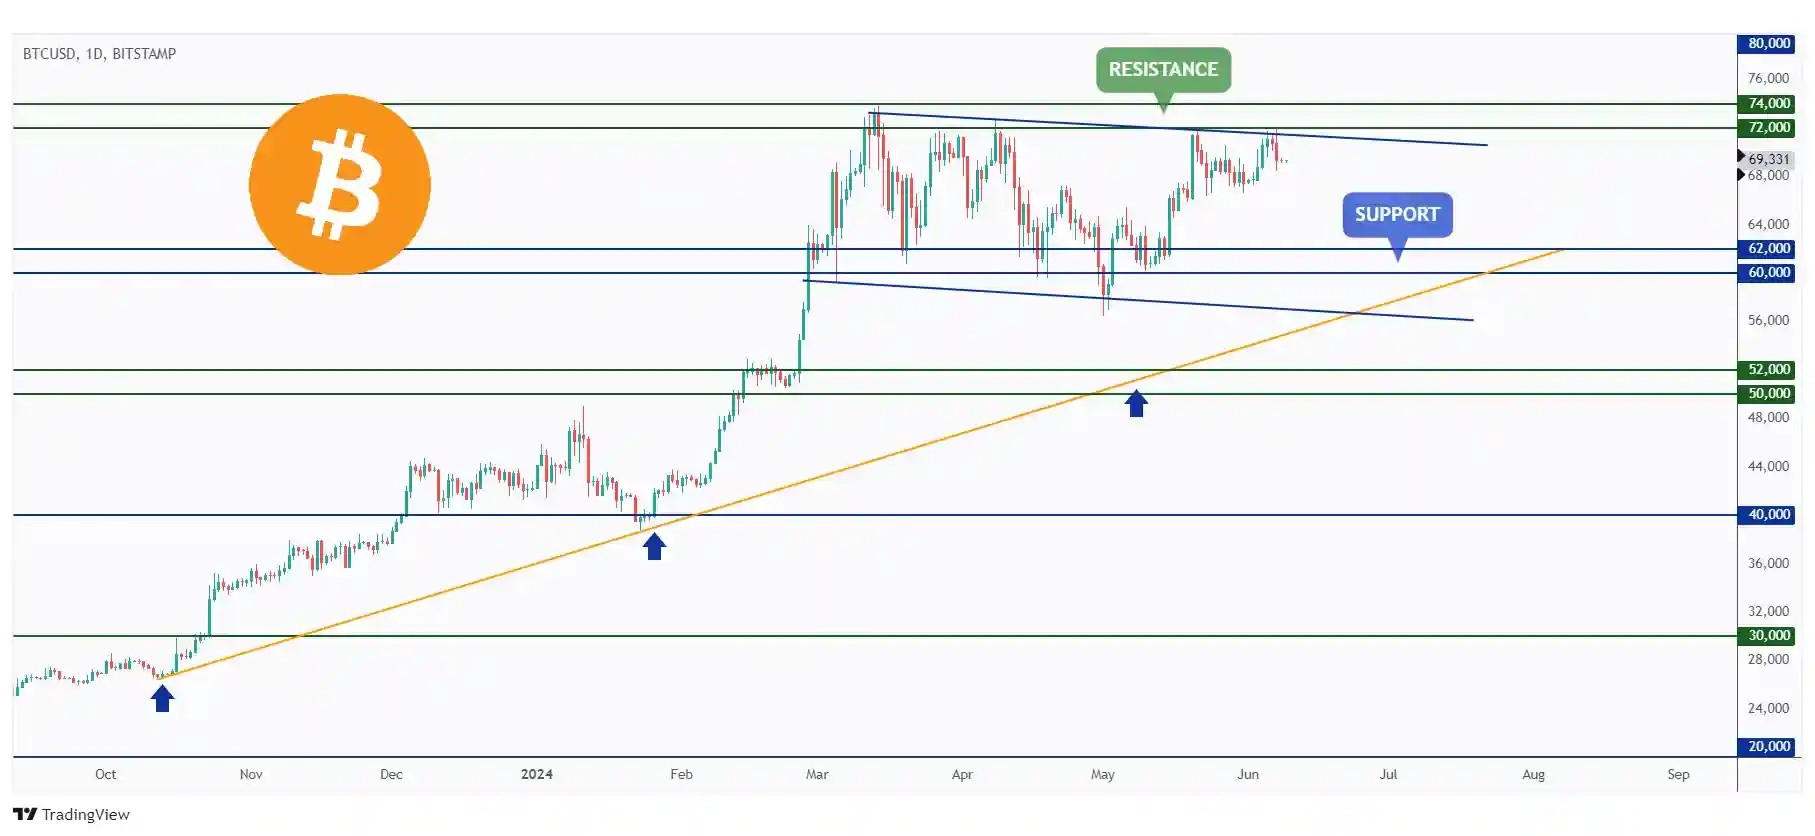 BTC daily chart hovering around a strong resistance at $72,000 and upper bound of a falling flat channel.